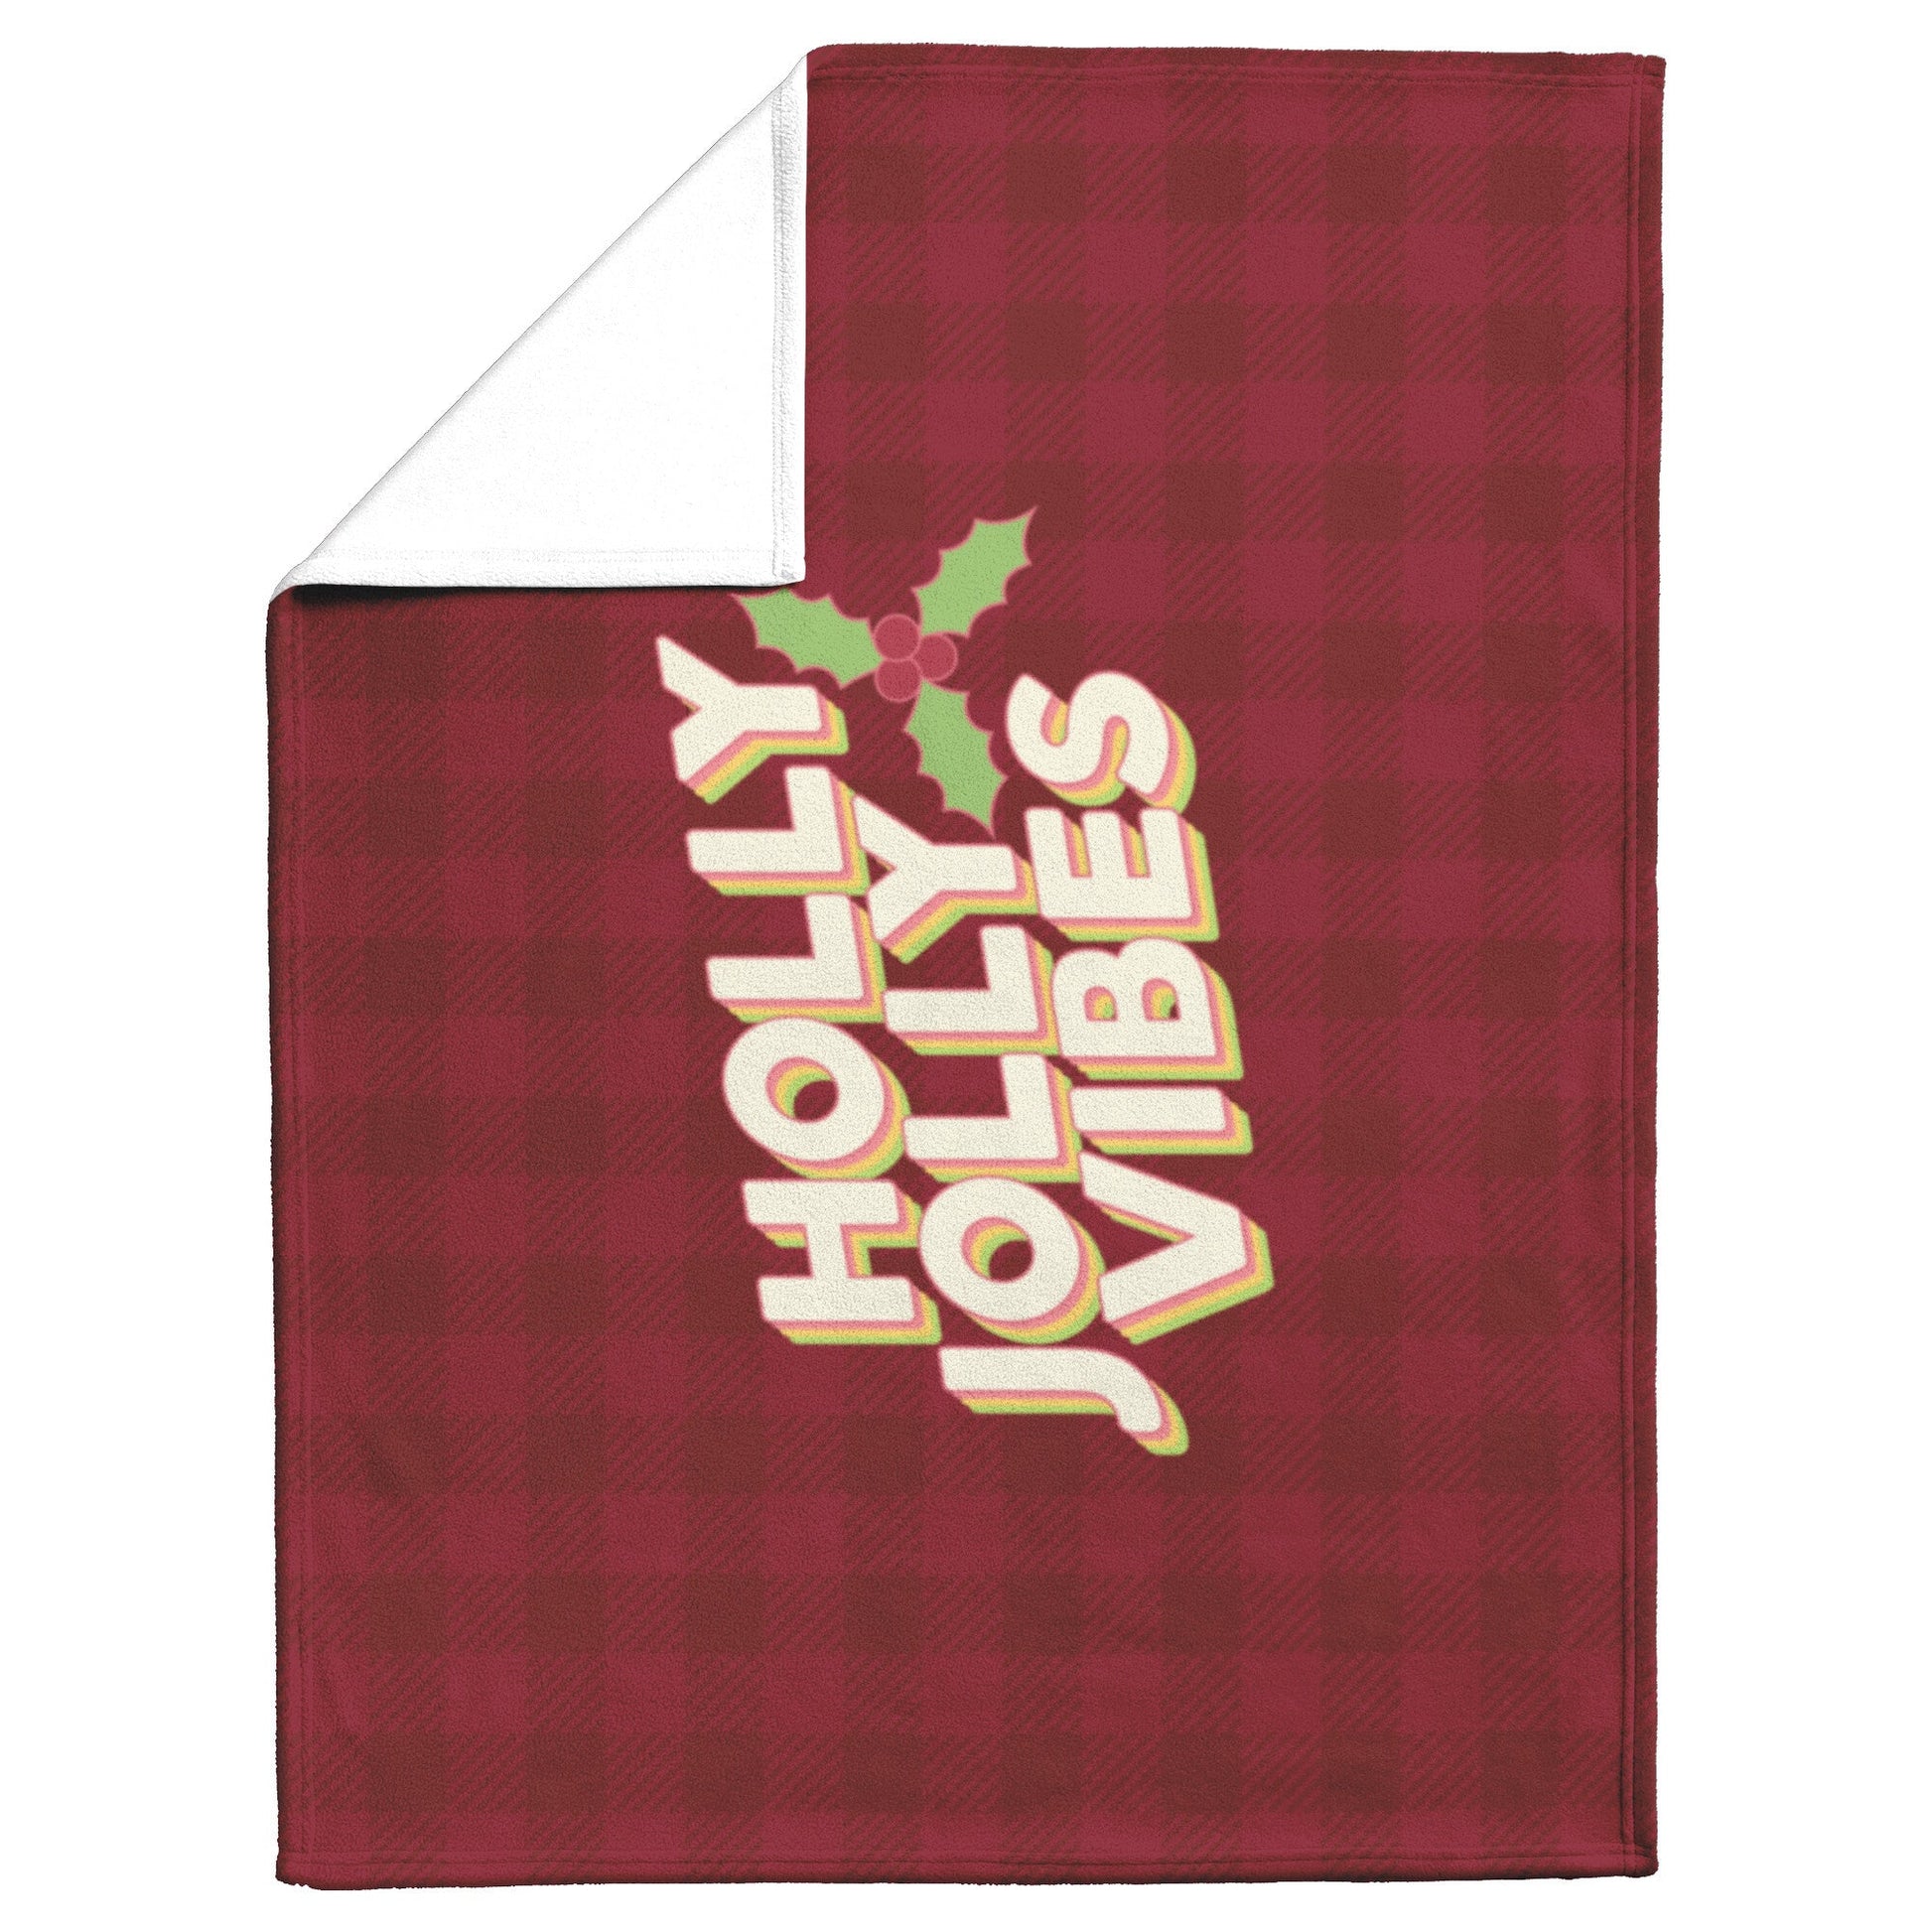 Holly Jolly Vibes Christmas Blanket • Vintage Christmas • Buffalo Plaid Blanket and Pillow Set Home Goods teelaunch 50x60 Sherpa 